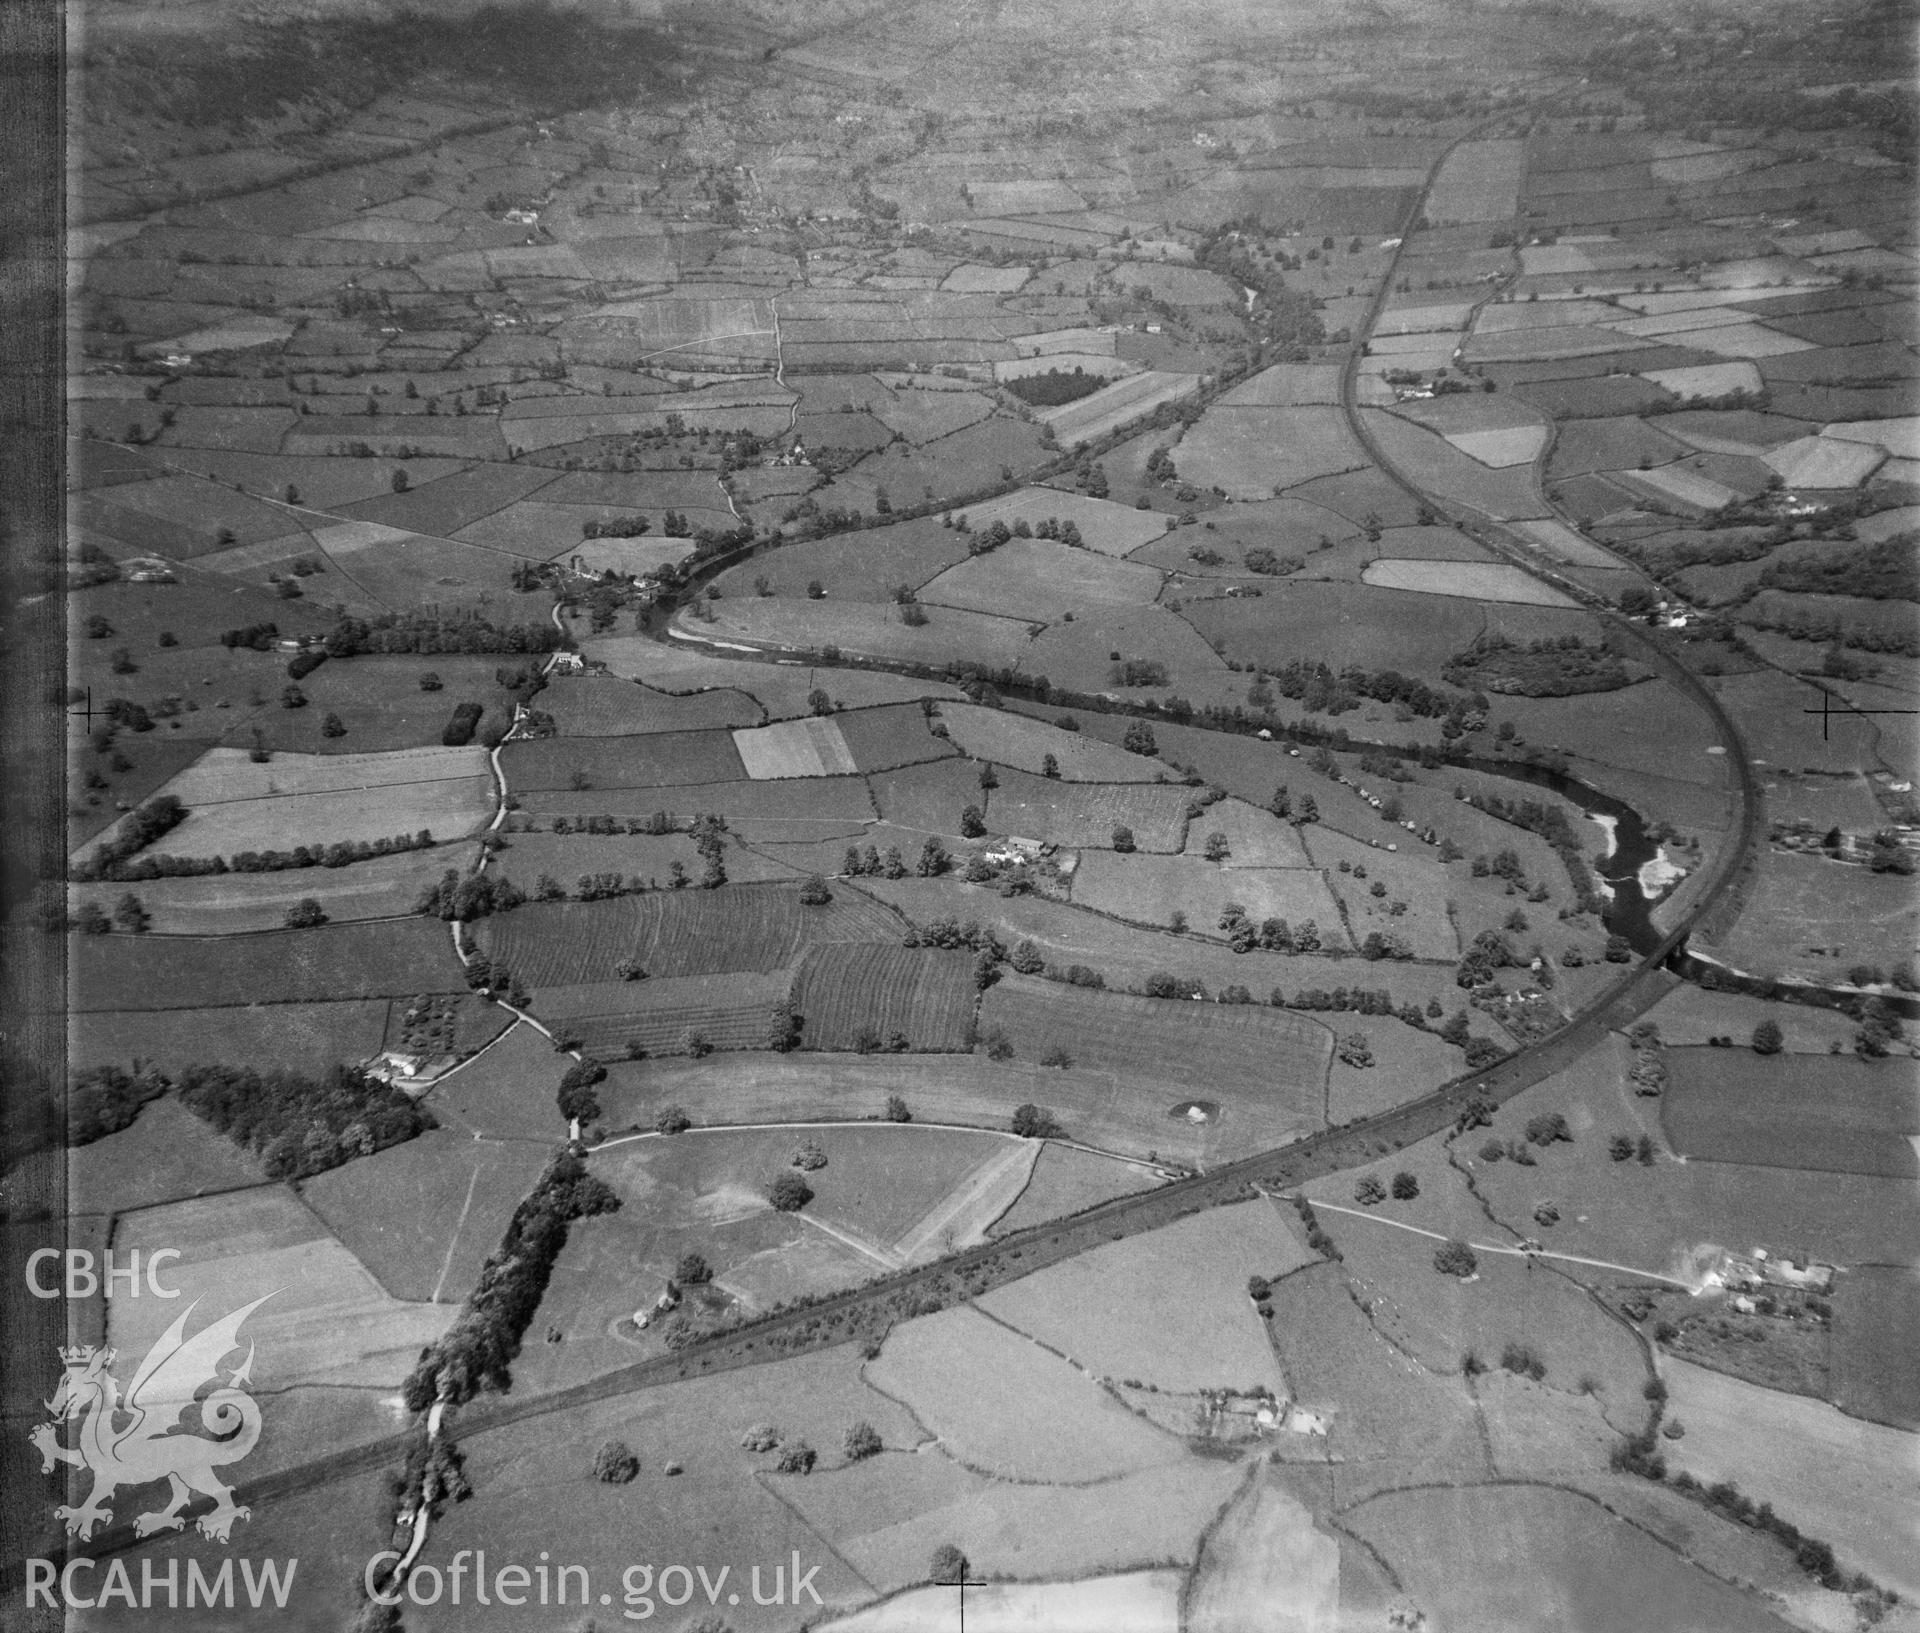 View of landscape south of Abergavenny showing the railway and river Usk